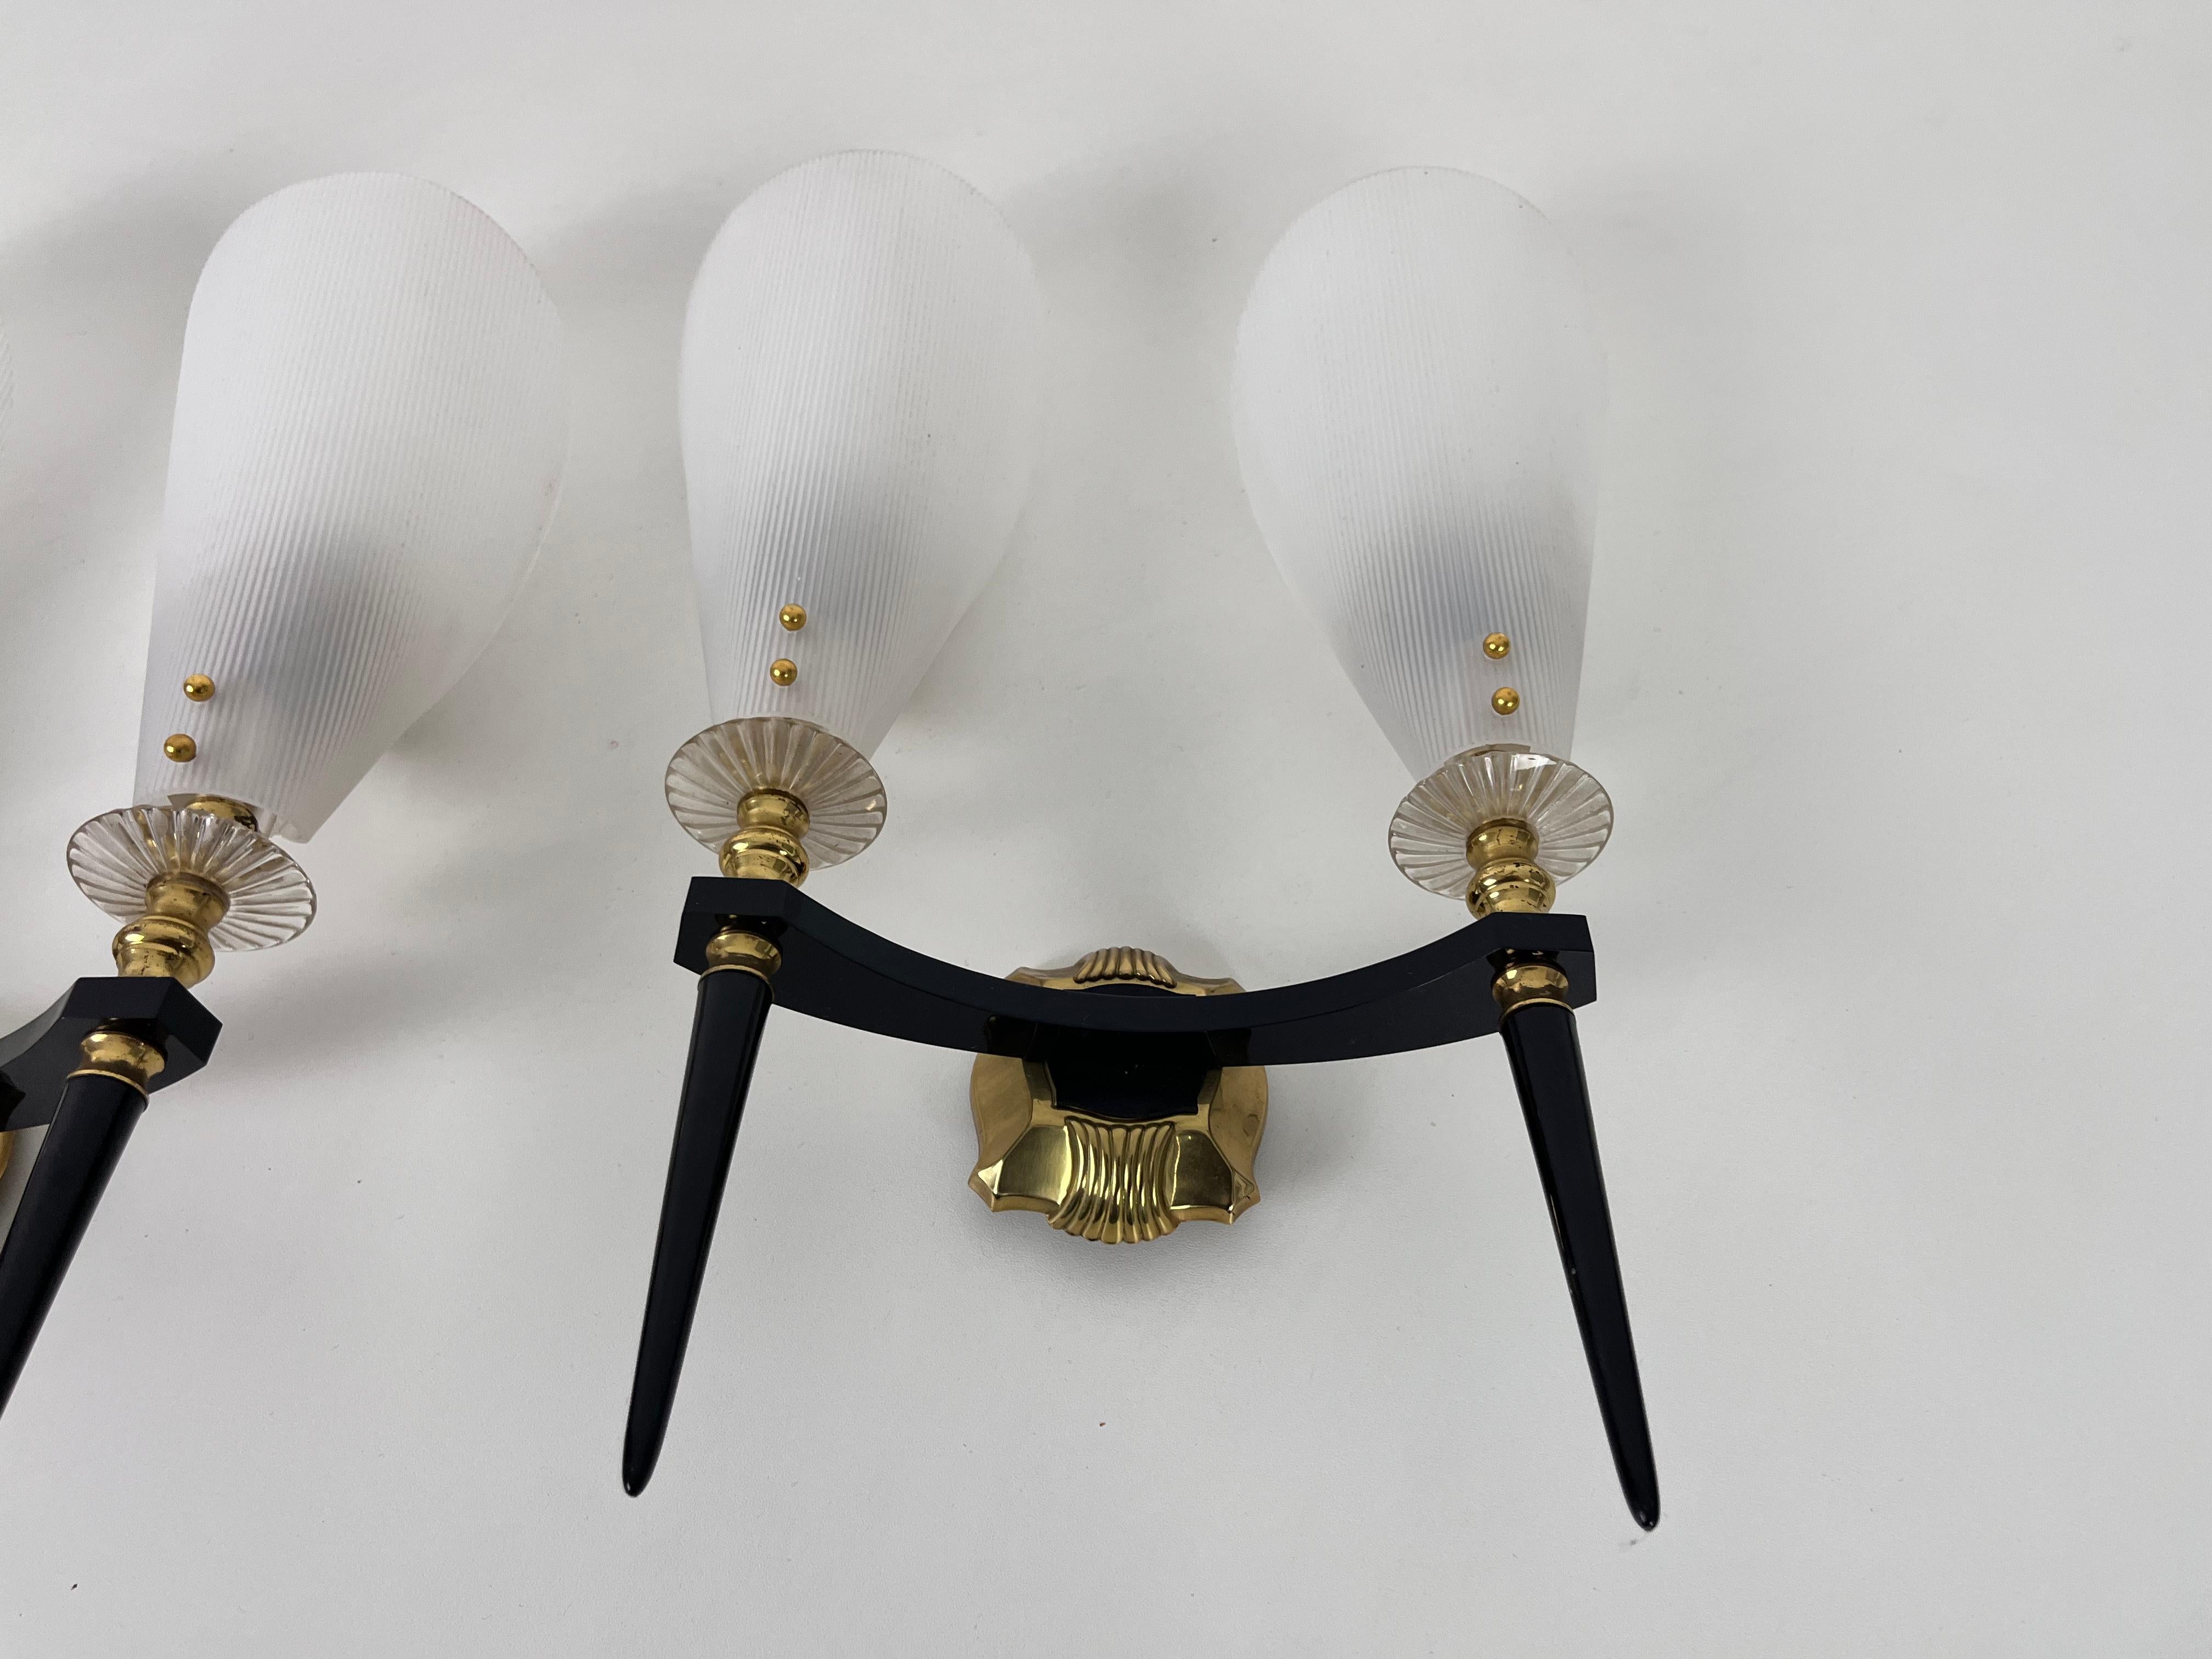 Pair of 2 Brass and Plexiglass Wall Lamps by Maison Arlus, 1960, France For Sale 6